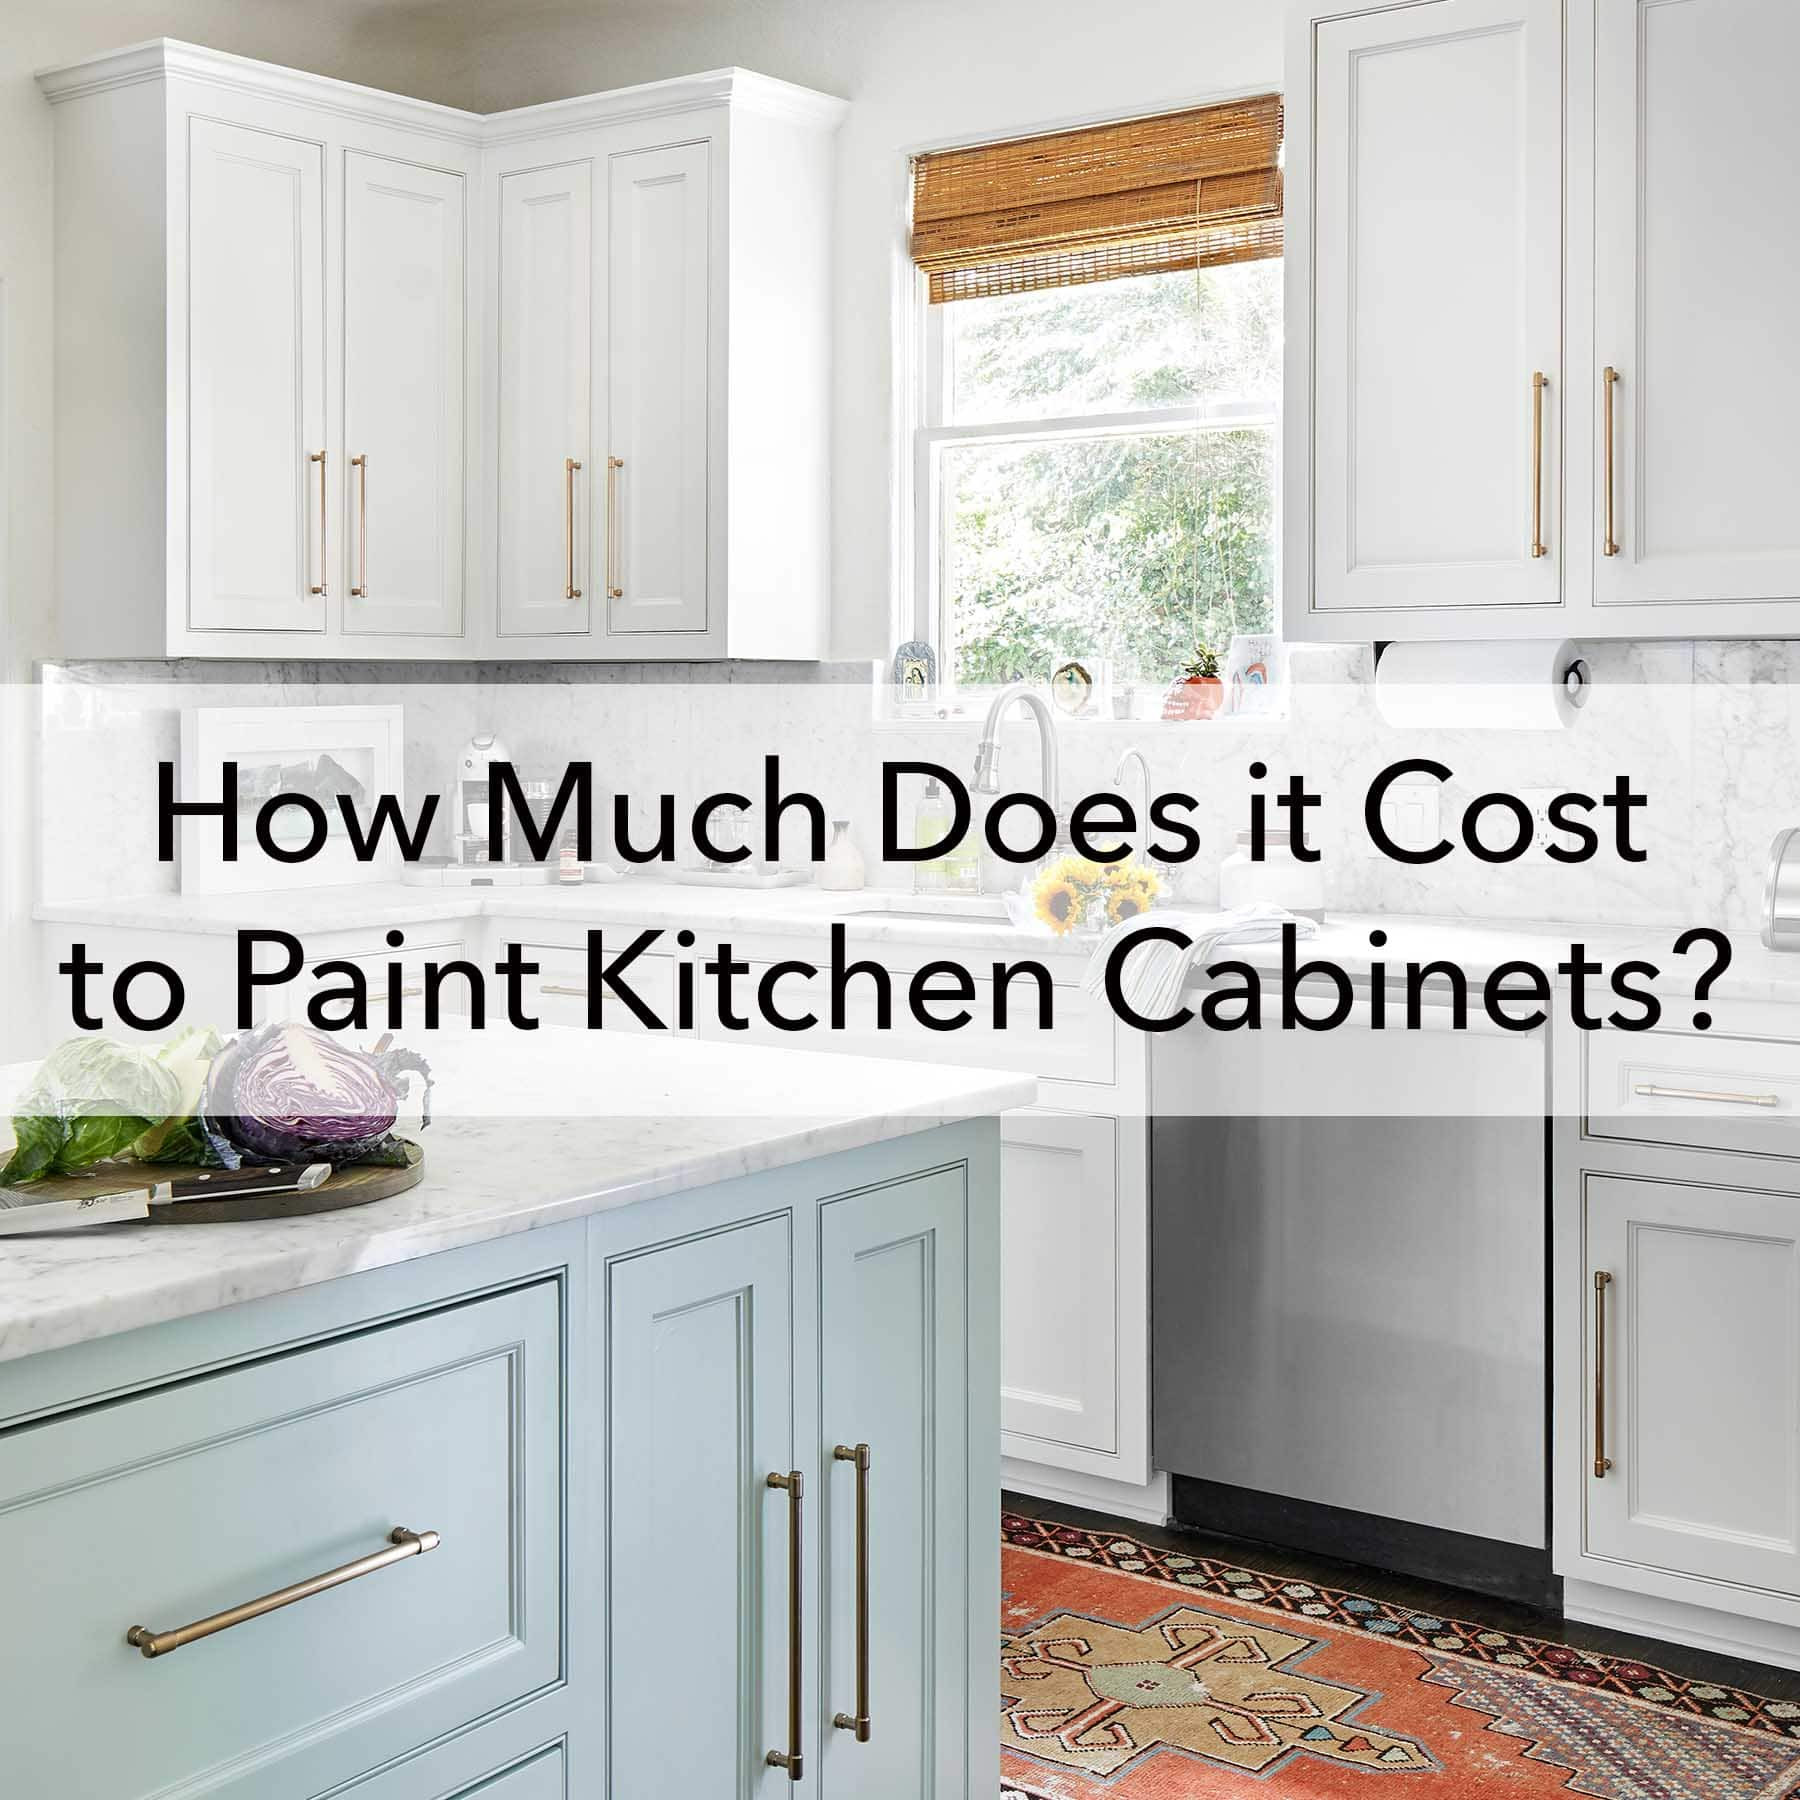 Kitchen Cabinet Painting Cost
 How Much Does It Cost to Paint Kitchen Cabinets Paper